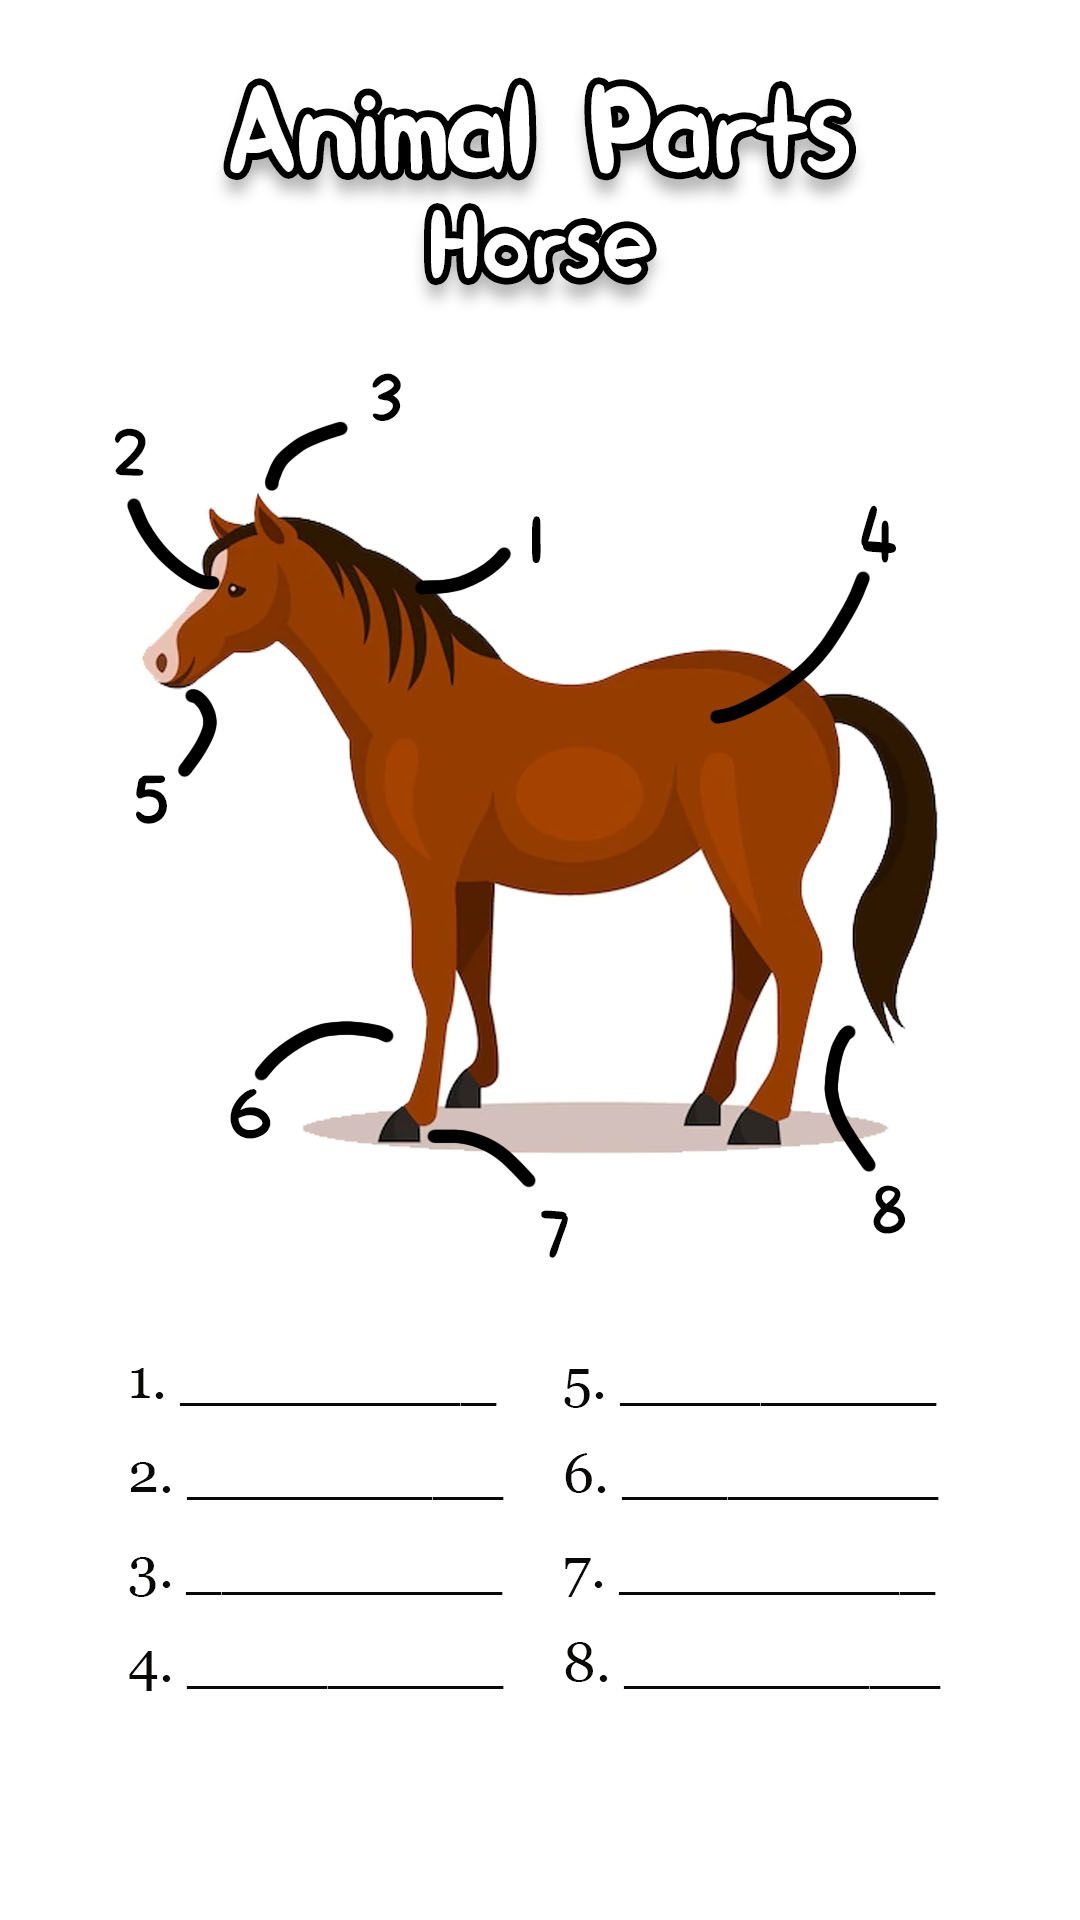 Horse Body Parts Worksheet Horse Riding Games Horse Camp Body Parts For Kids